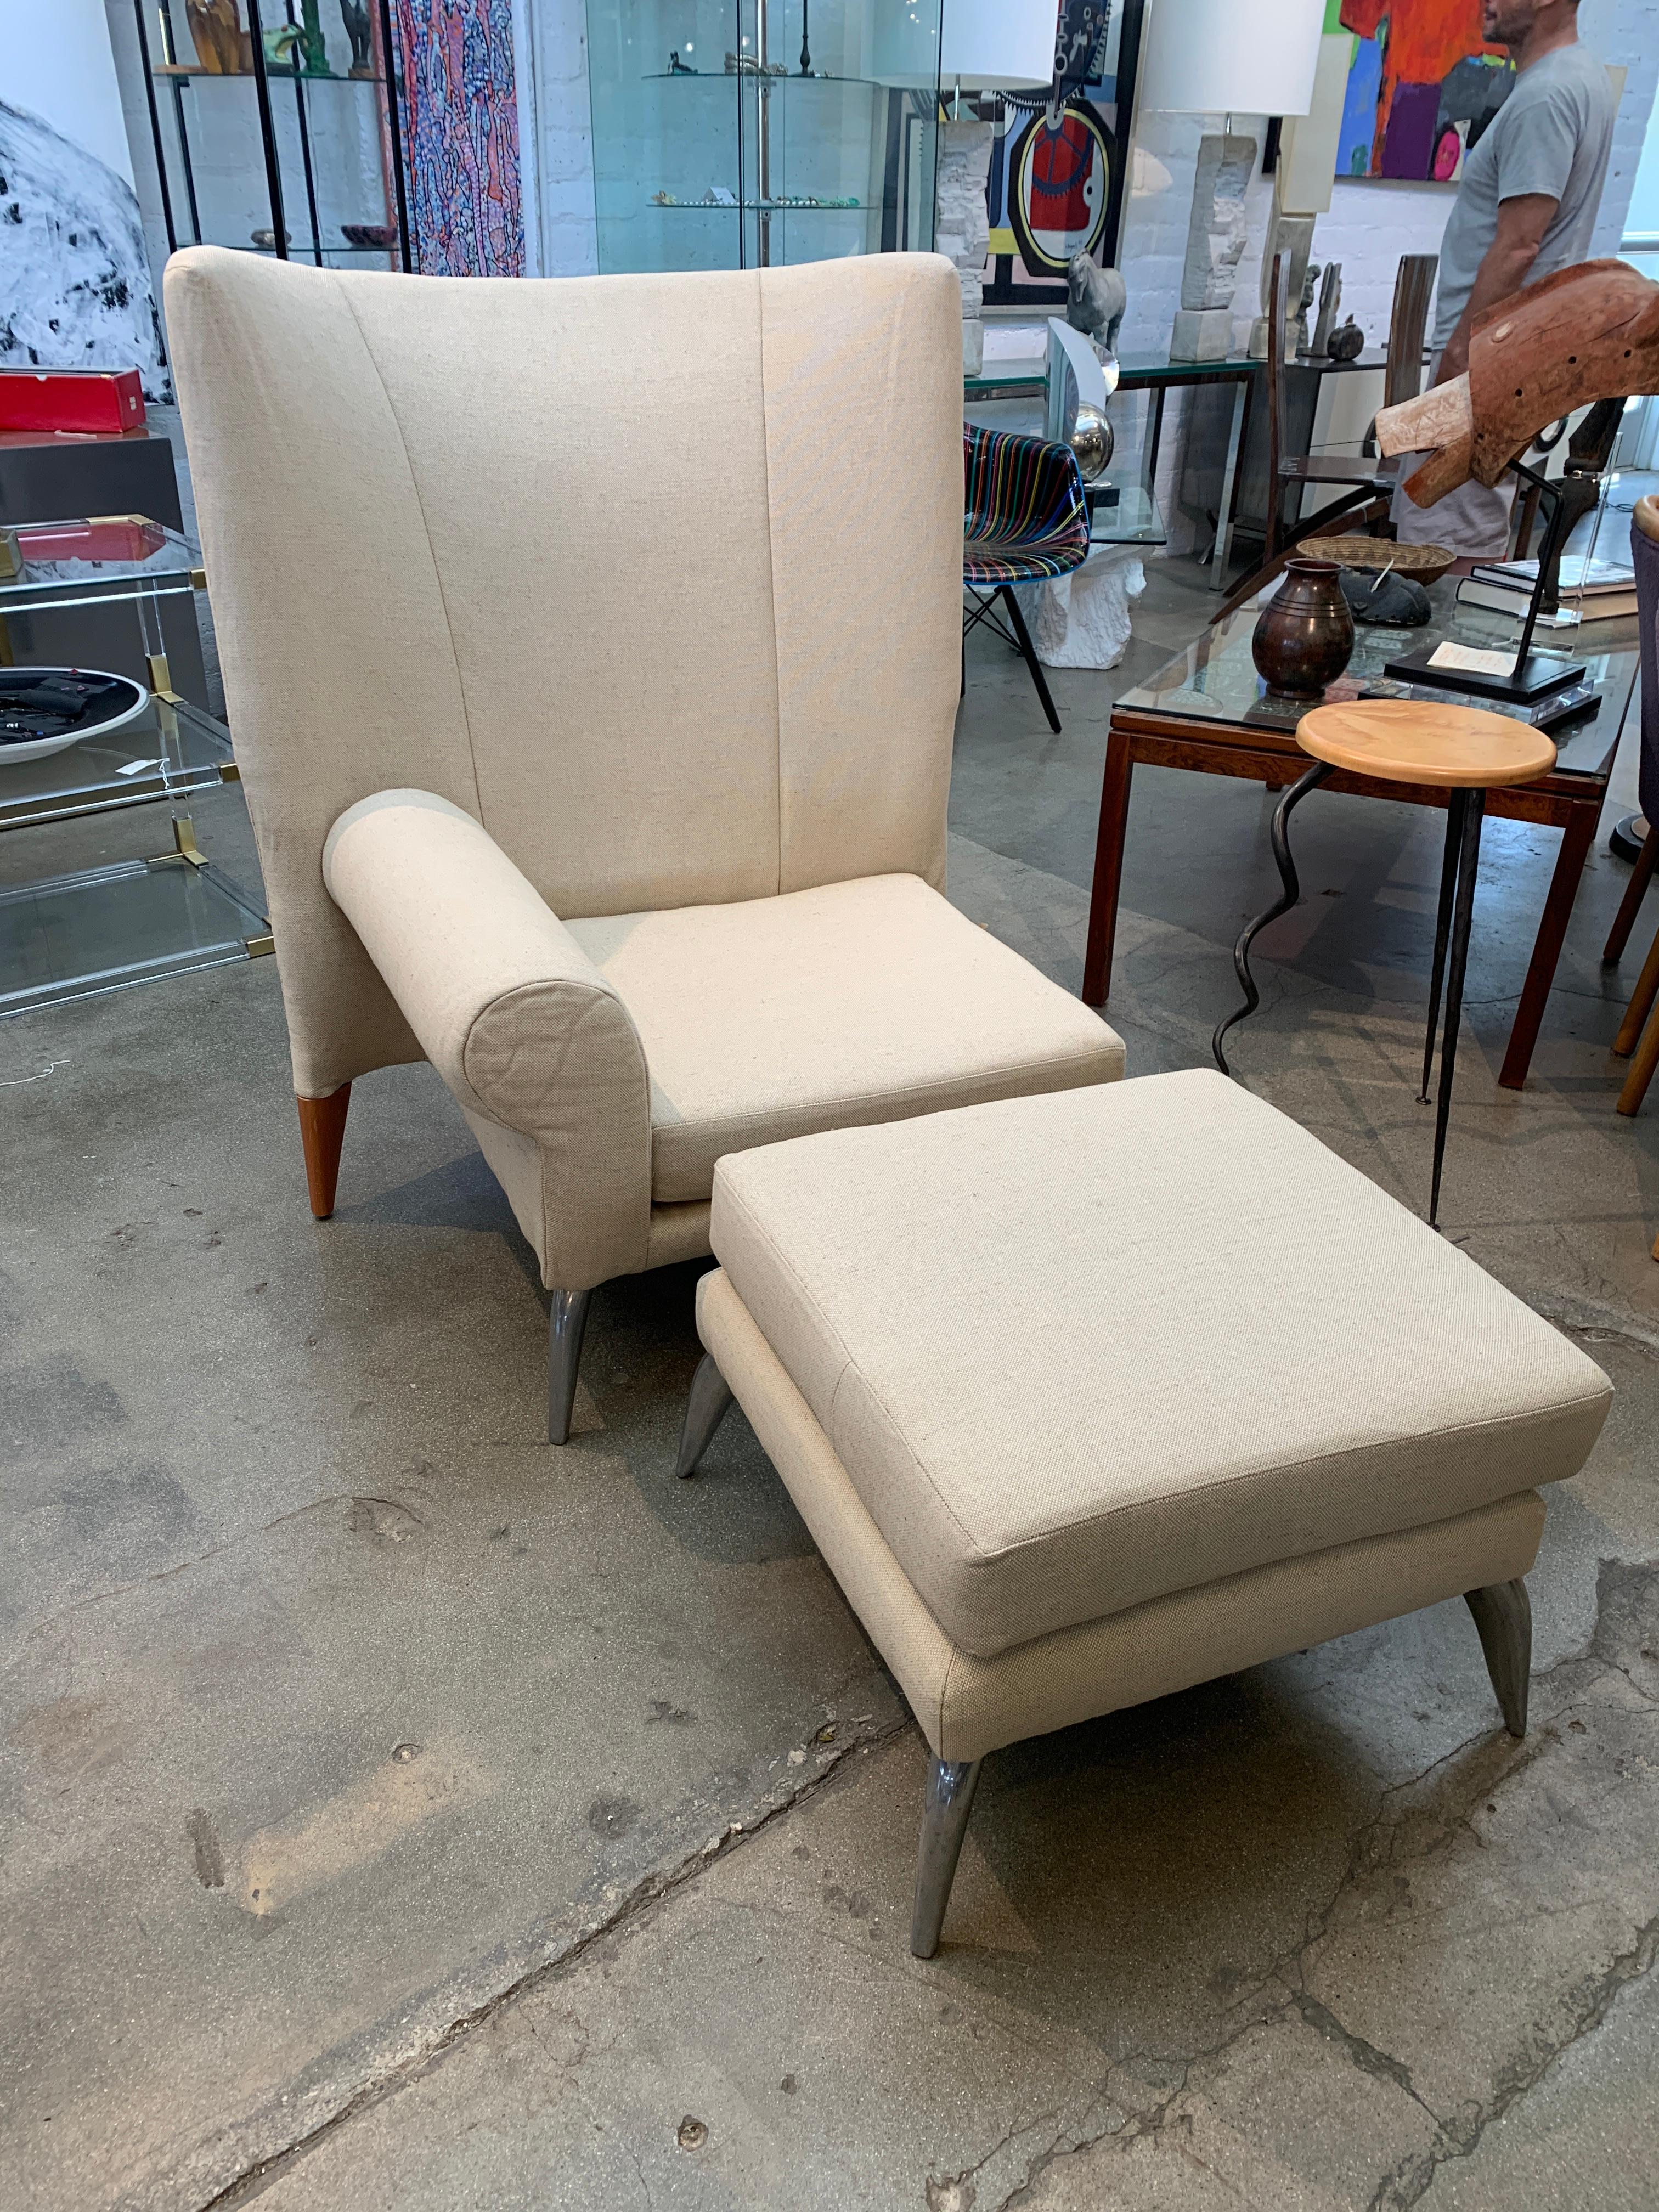 A Phillip Starck designed chair and ottoman from the Royalton hotel in New York City produced by Driade. These chairs were in the lobby of the iconic Ian Schrager hotel. These were re-upholstered in a linen fabric. The ottoman measures approx 23